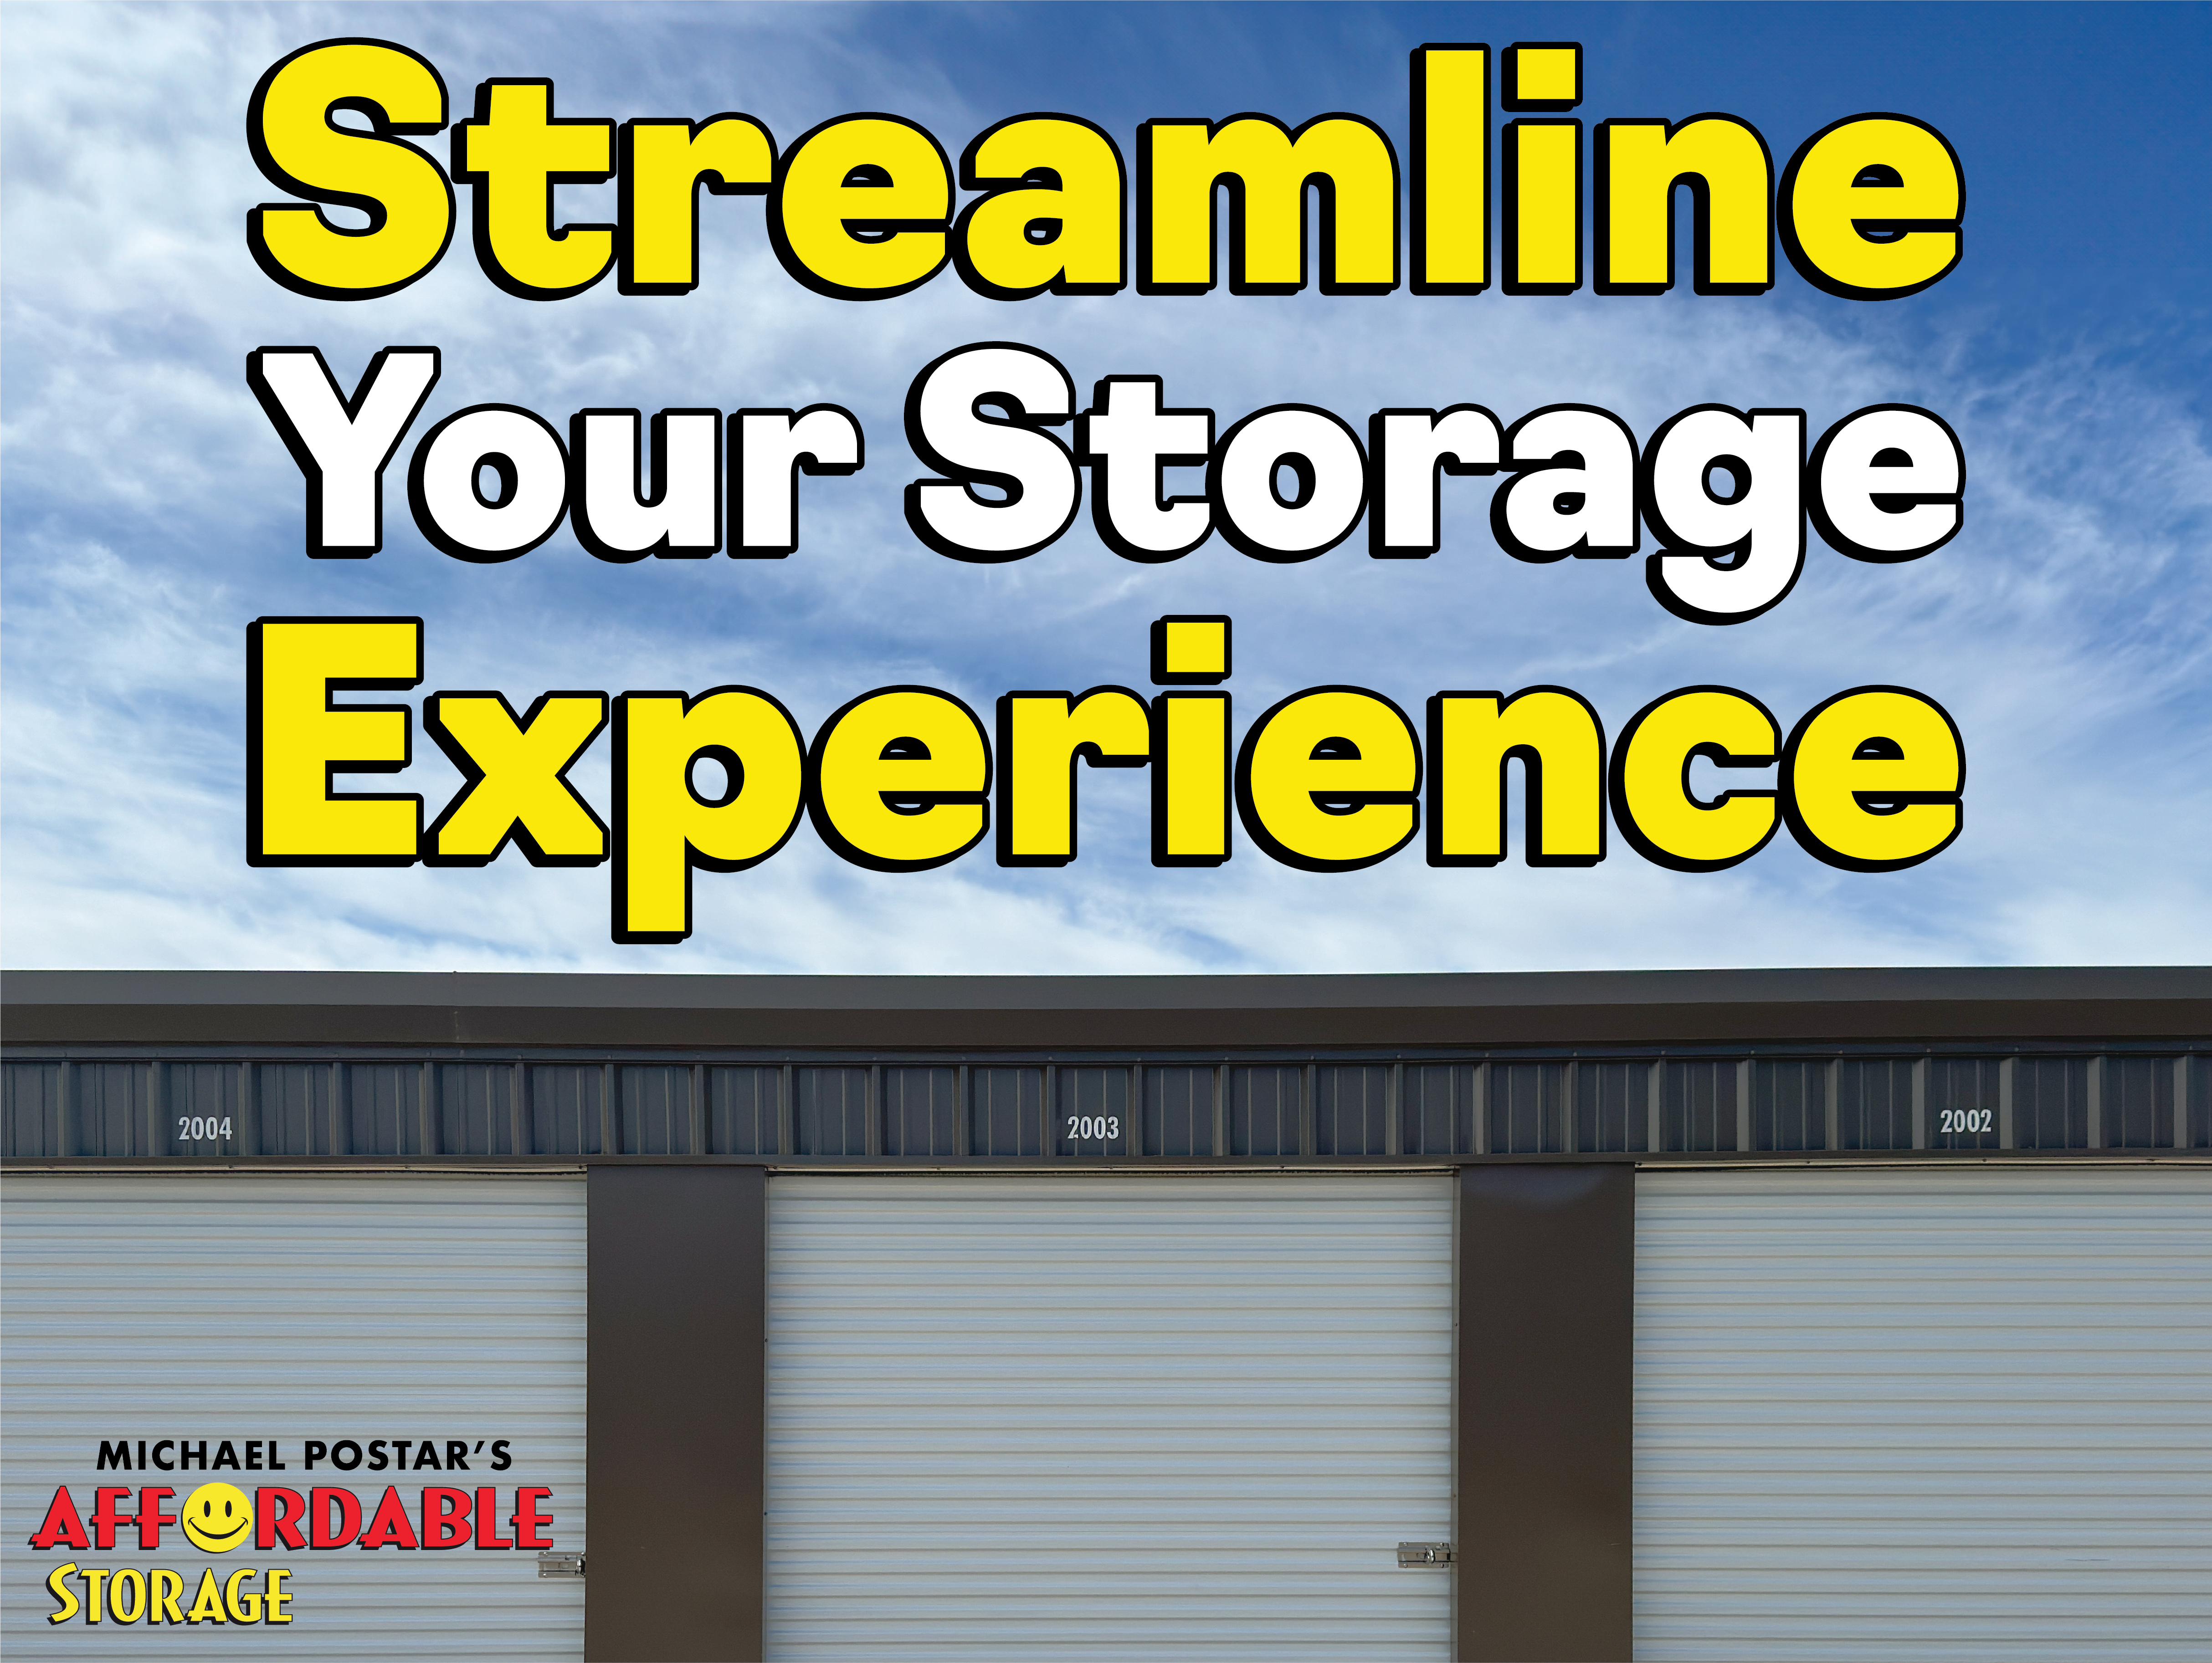 Streamline your storage experience at Affordable Storage